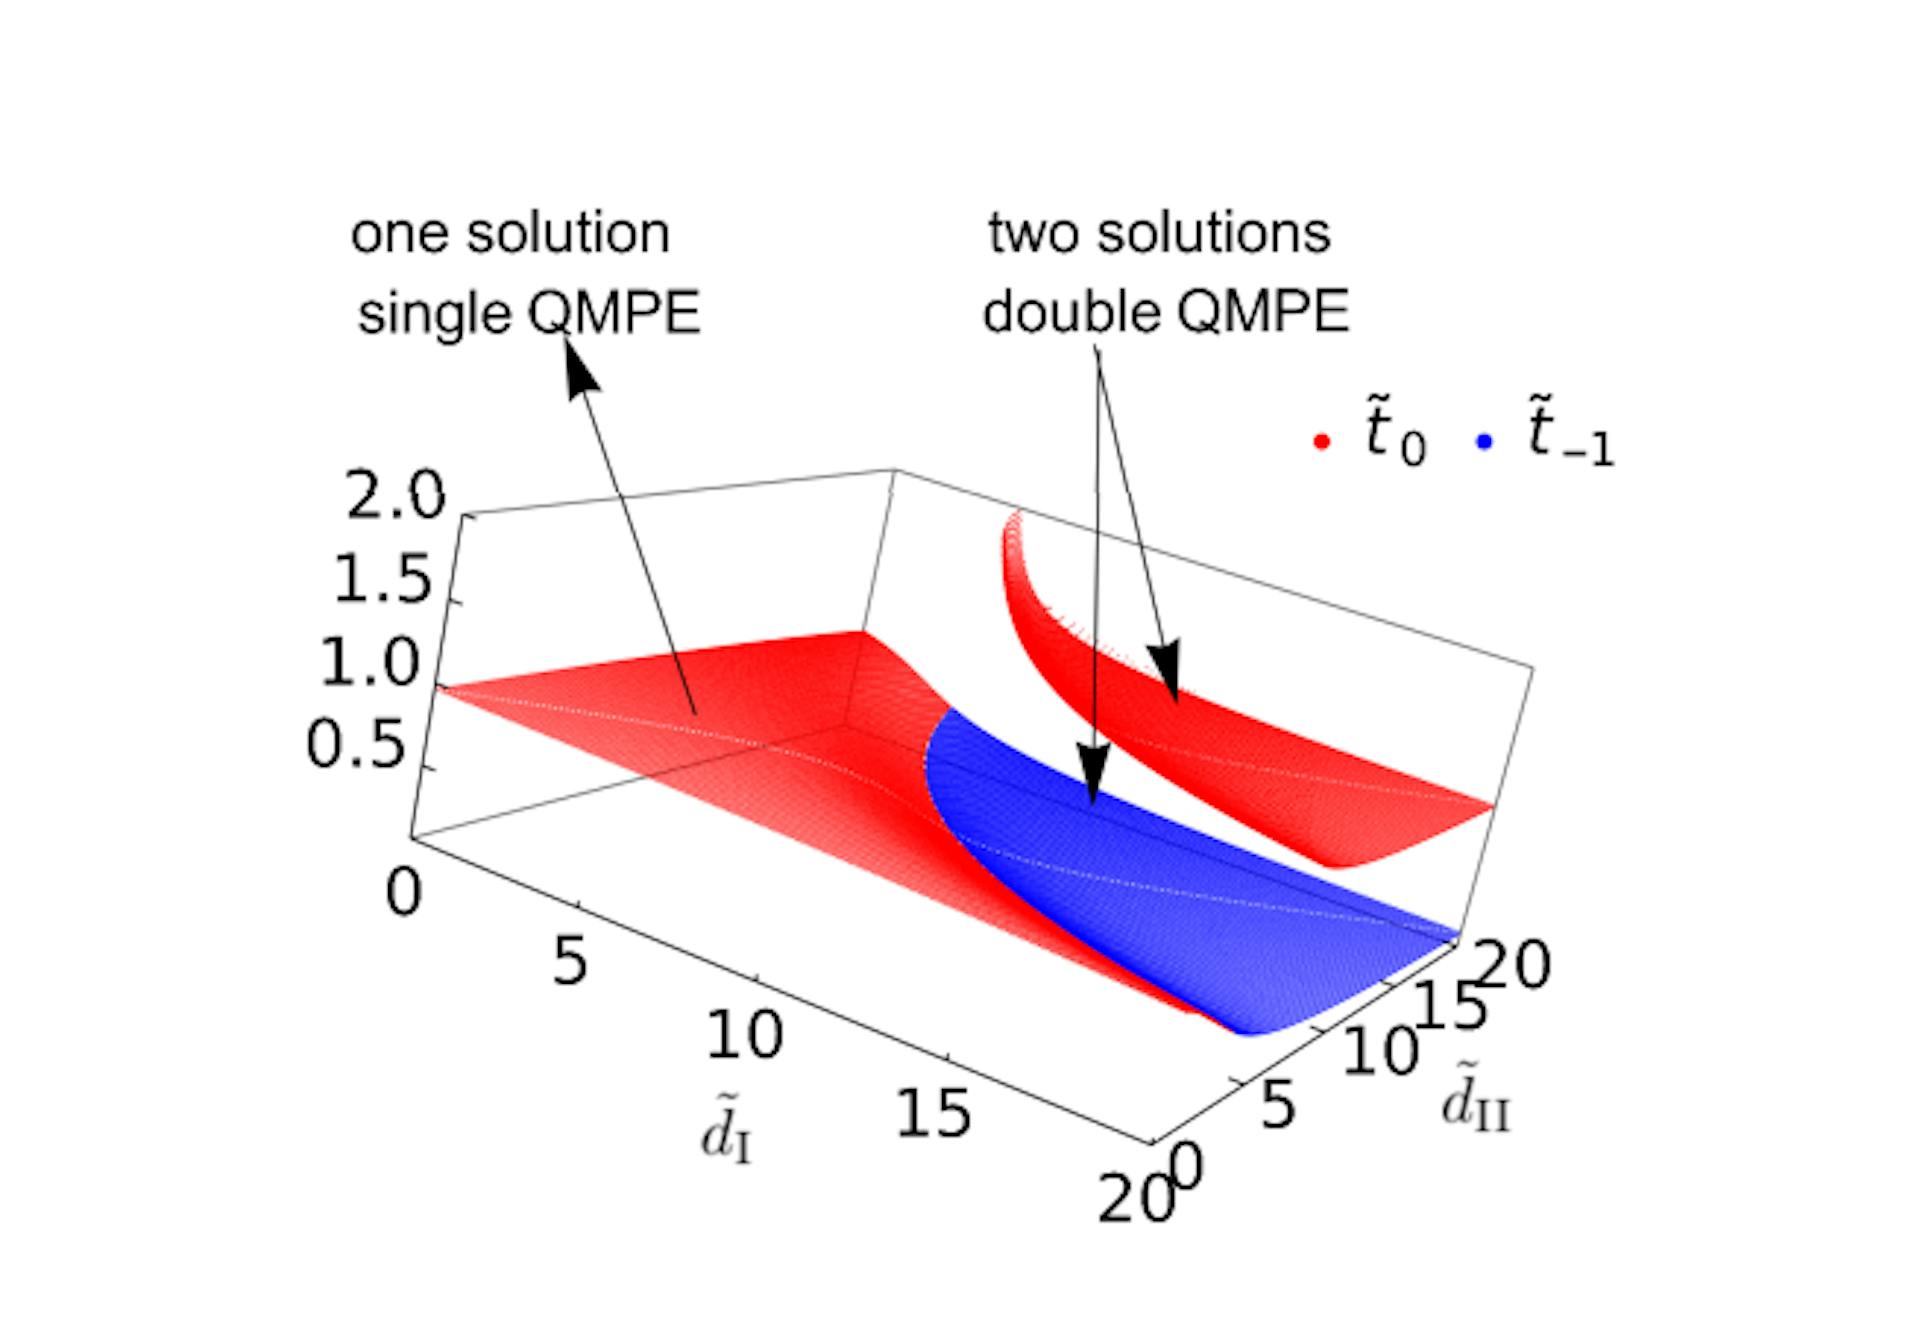 FIG. 1. The figure shows the intersection times t˜0 and t˜−1 from Eq. (17), as functions of the control parameters d˜I and ˜dII. The regions with only one solution t˜0 indicate single QMPE in the ground state probability ρgg(t) whereas the regions with both solutions imply double QMPE. Parameters used are ˜d = 4.0, Γ˜I = Γ˜II = Γ =˜ p (568 + 64√ 2)/2 [Eq. (8)].